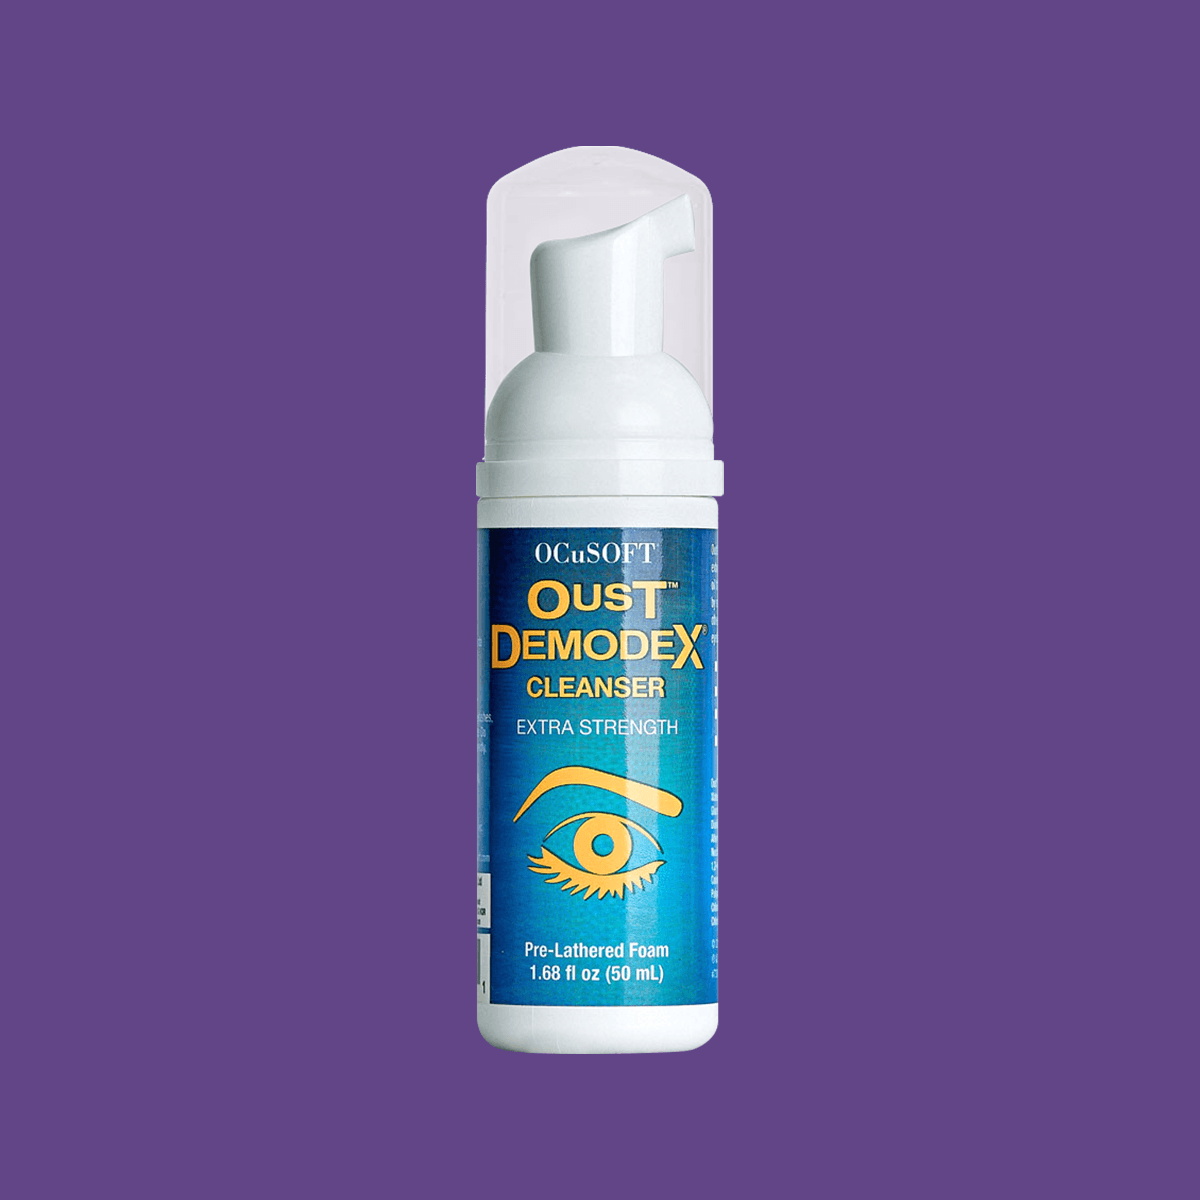 OCuSOFT Oust Demodex Cleanser Compliance Kit (50ml Foam with 100 pads) - Dryeye Rescue